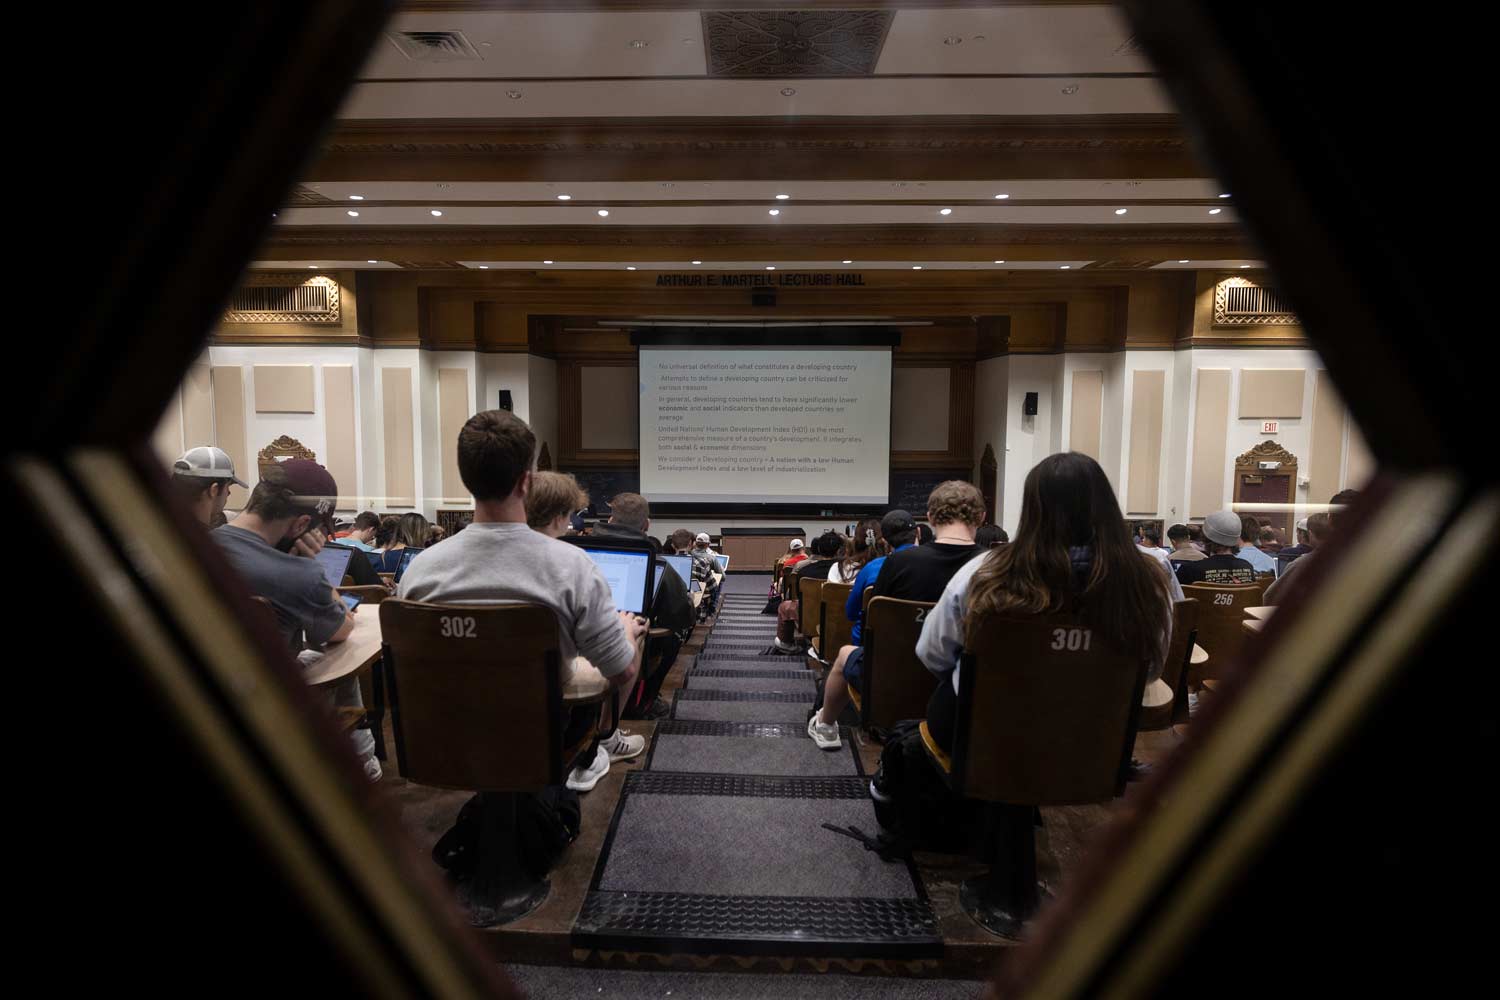 Looking through a window at a packed Texas A&M University lecture hall